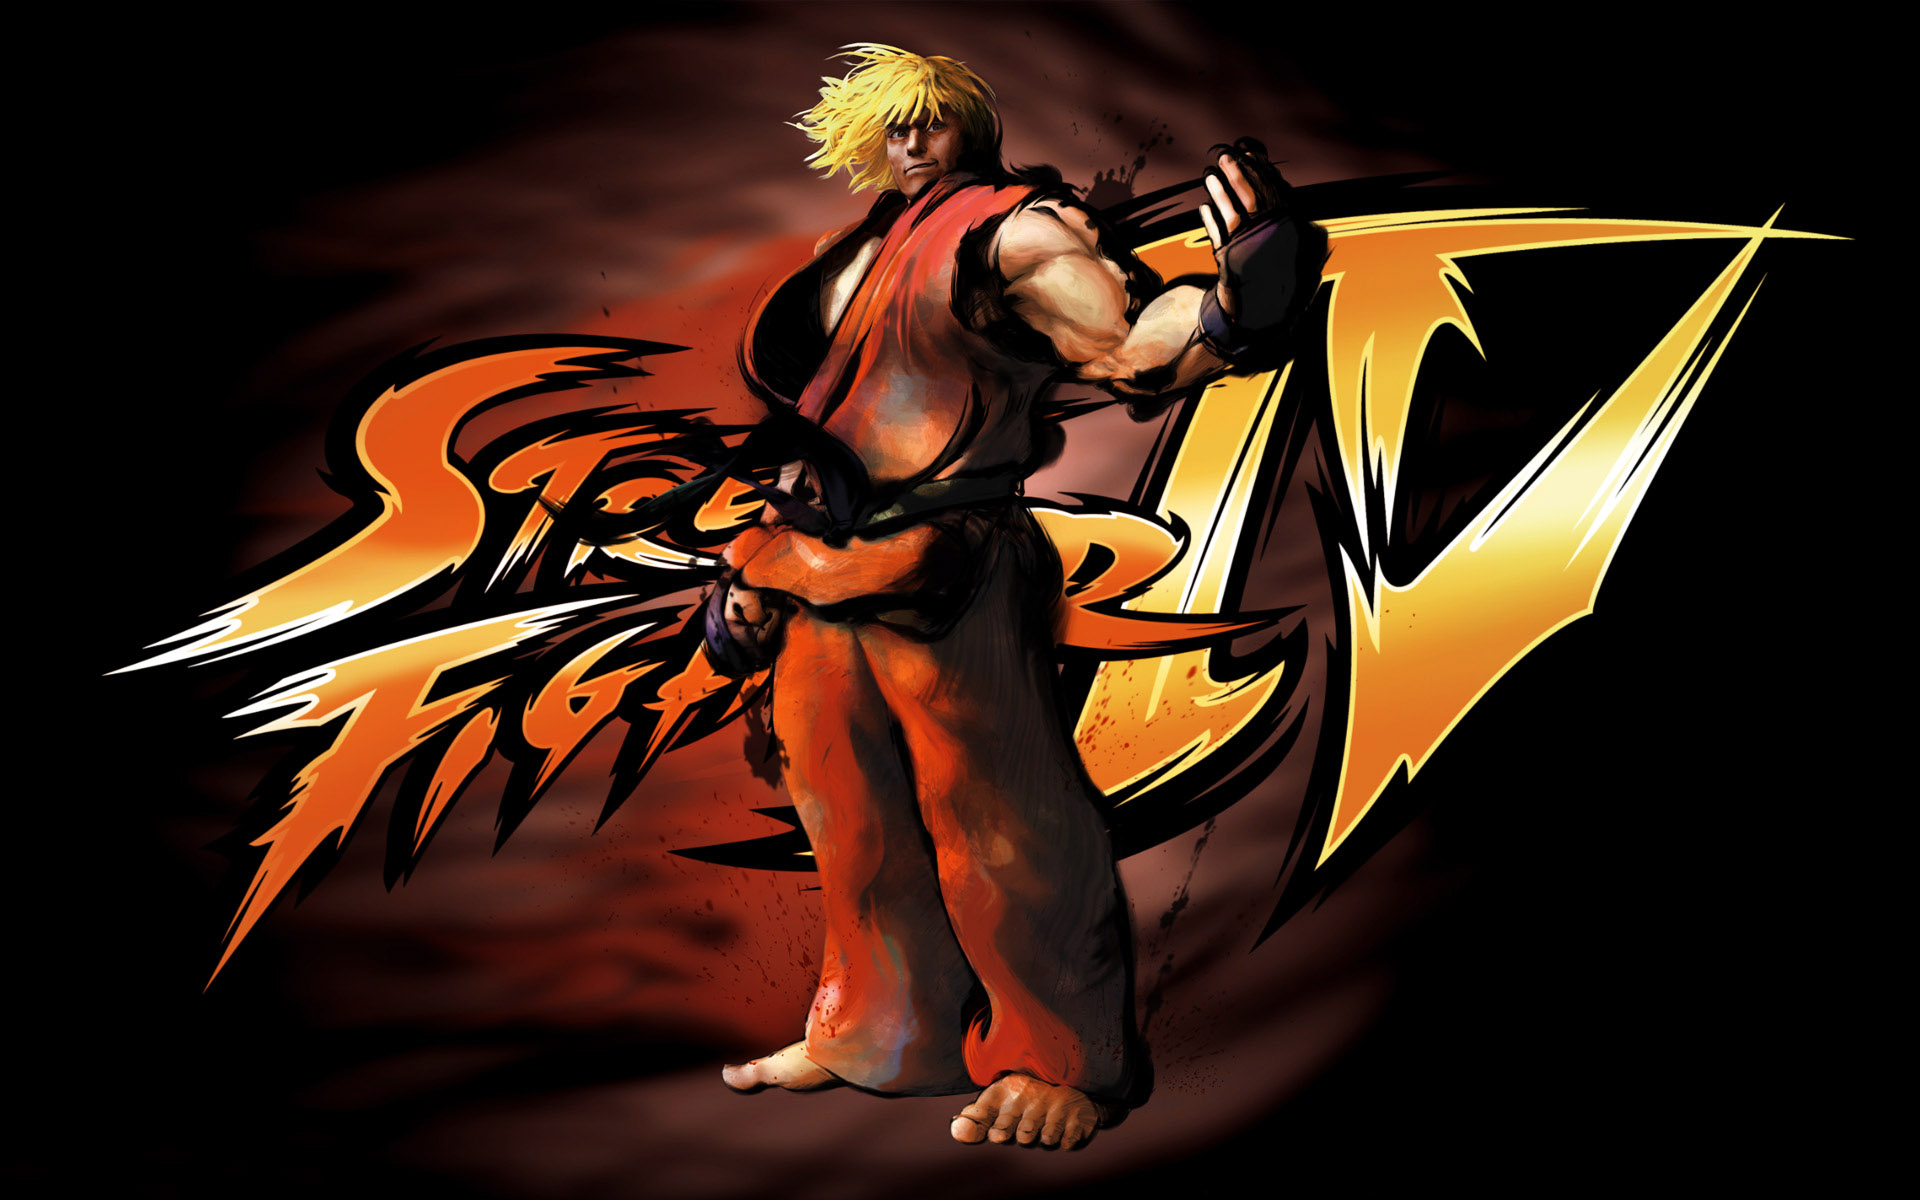 Video Game Street Fighter 1920x1200